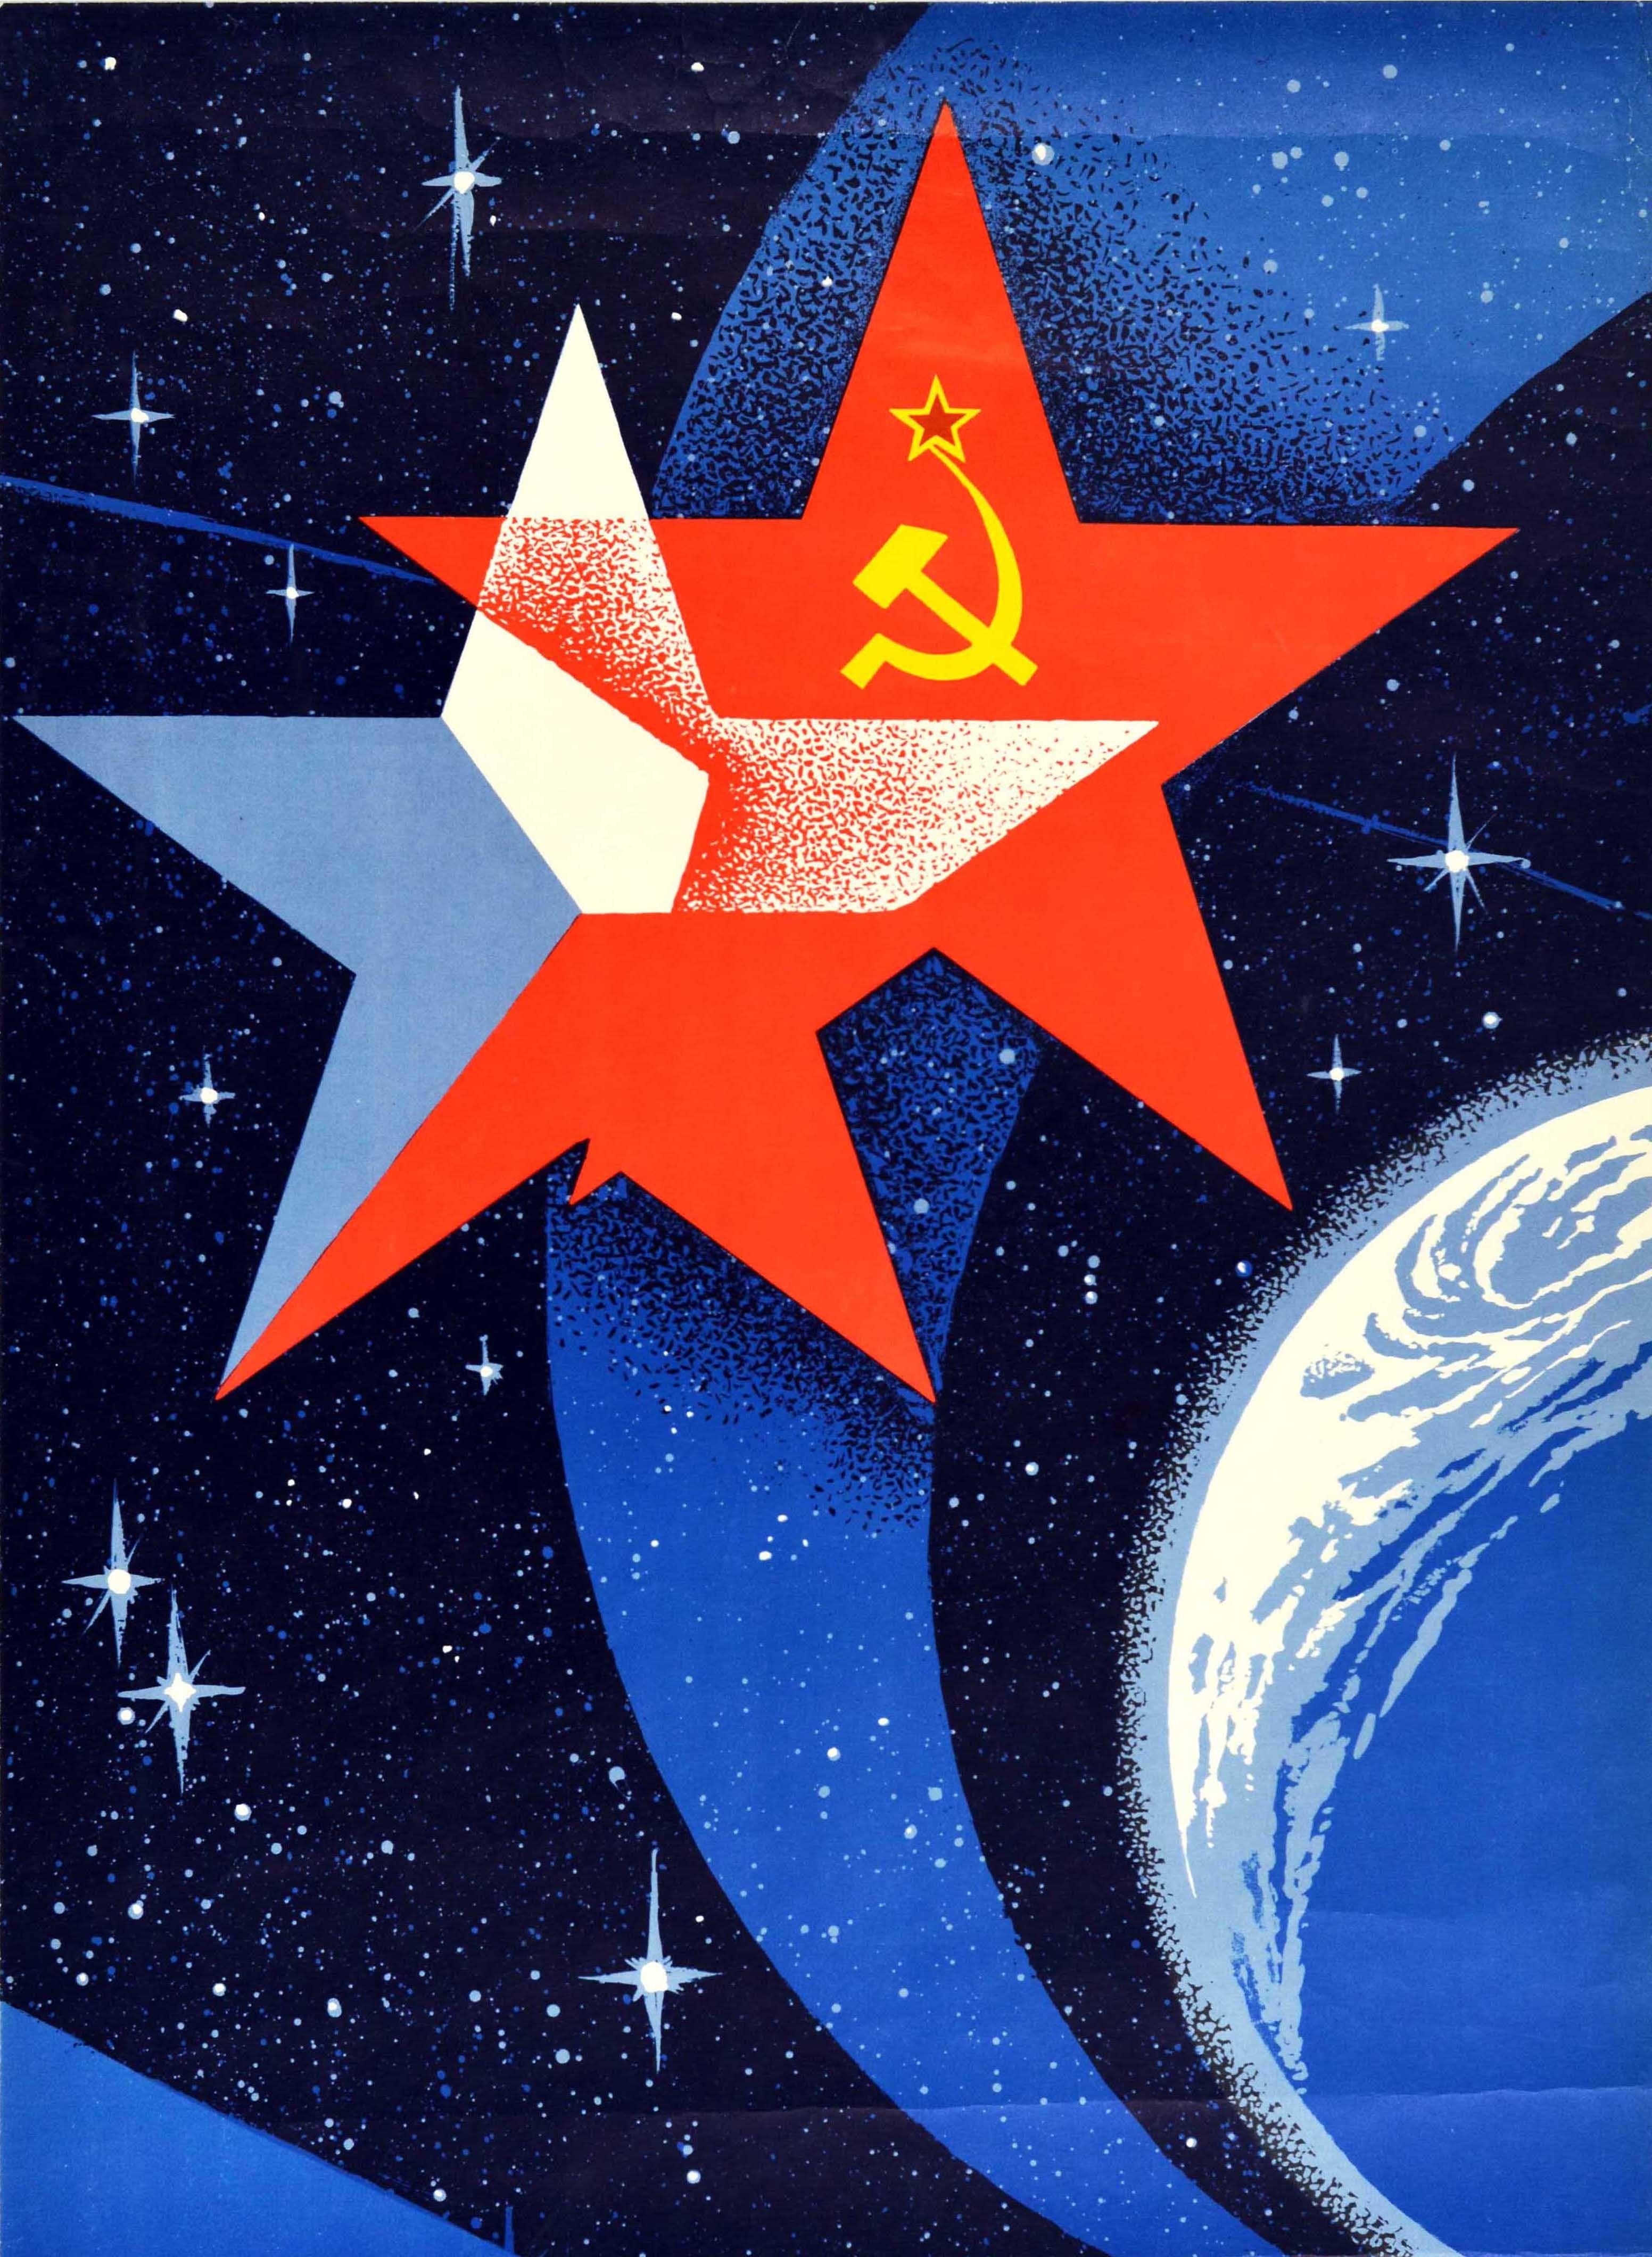 Original vintage Soviet space propaganda poster celebrating the joint Soviet-Czech Soyuz 28 Союз 28 space mission on 2 March 1978 featuring a great design depicting two stars representing the flag of Czechoslovakia and the hammer and sickle USSR